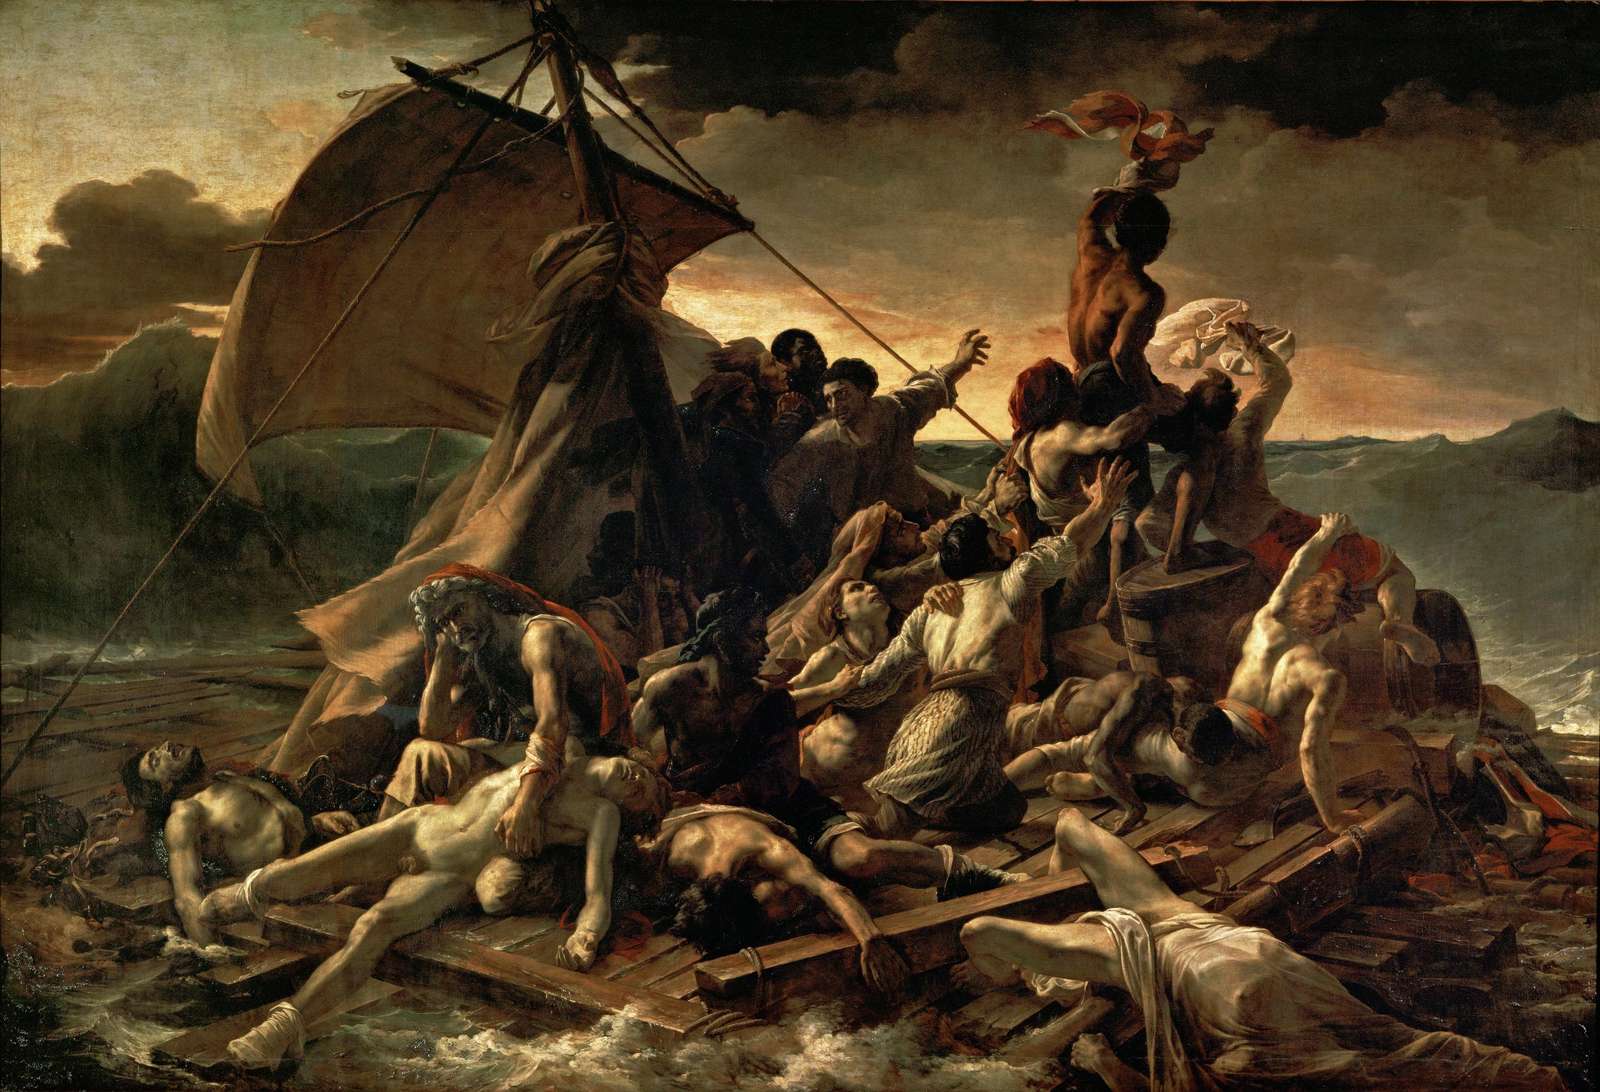 The Raft of the Medusa (1818-19) puzzle online from photo